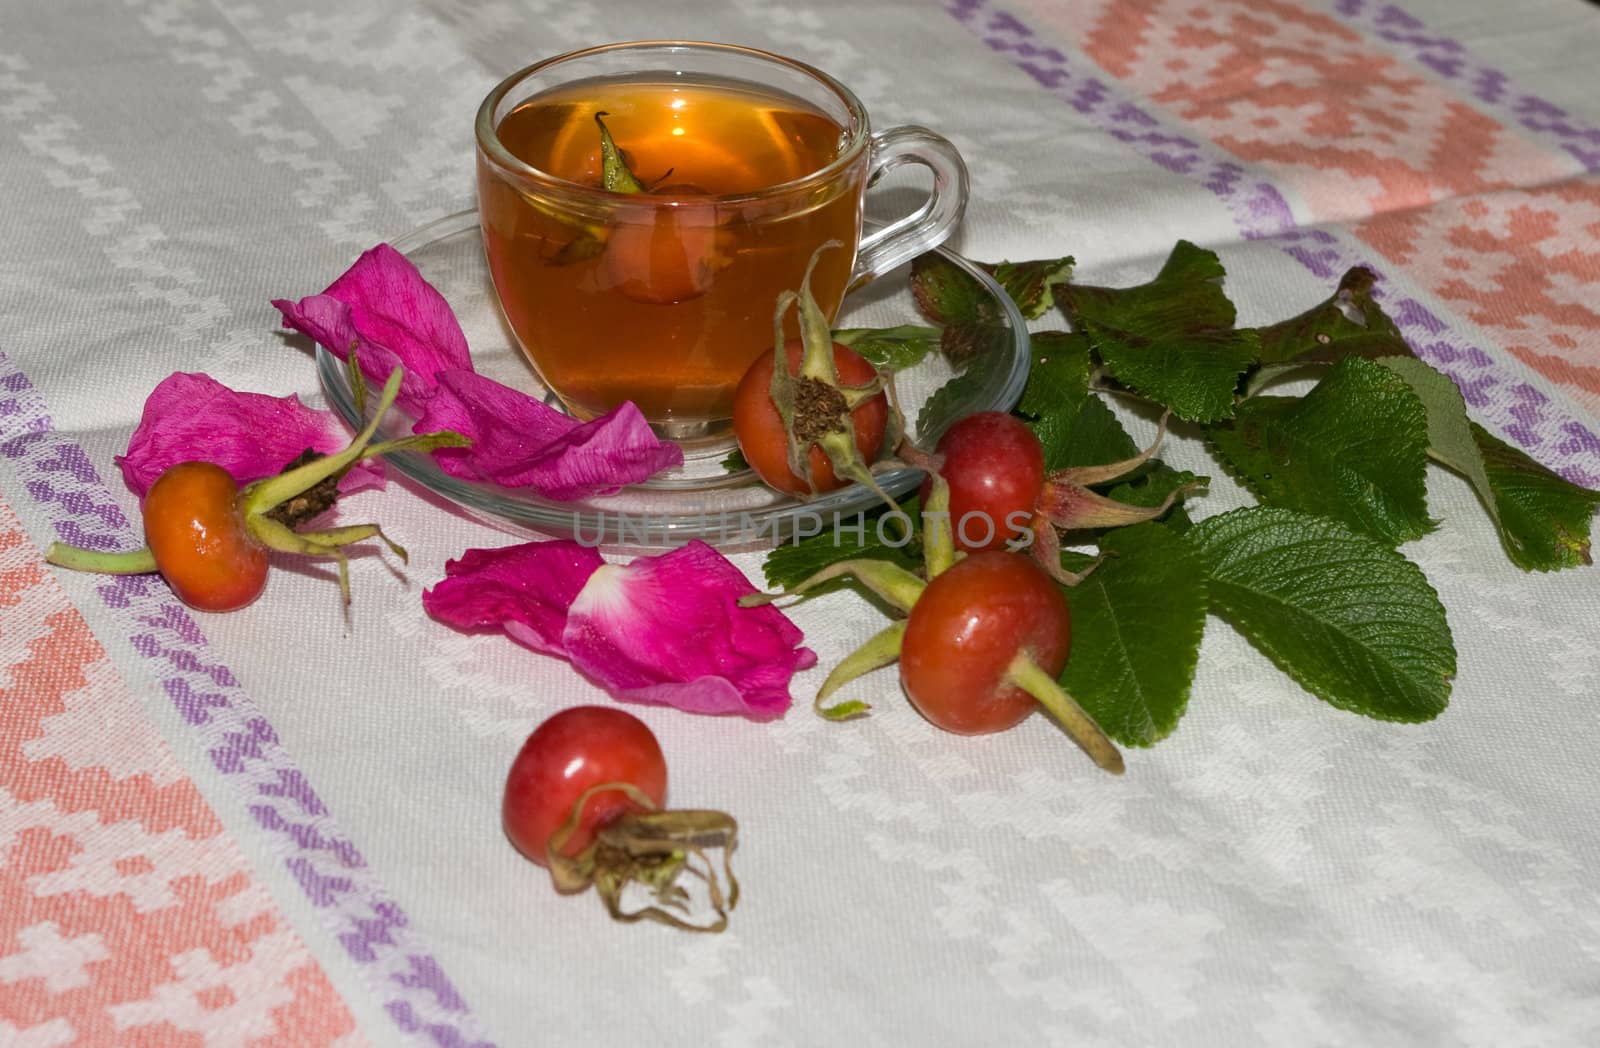 The image of a cup of tea from a dogrose